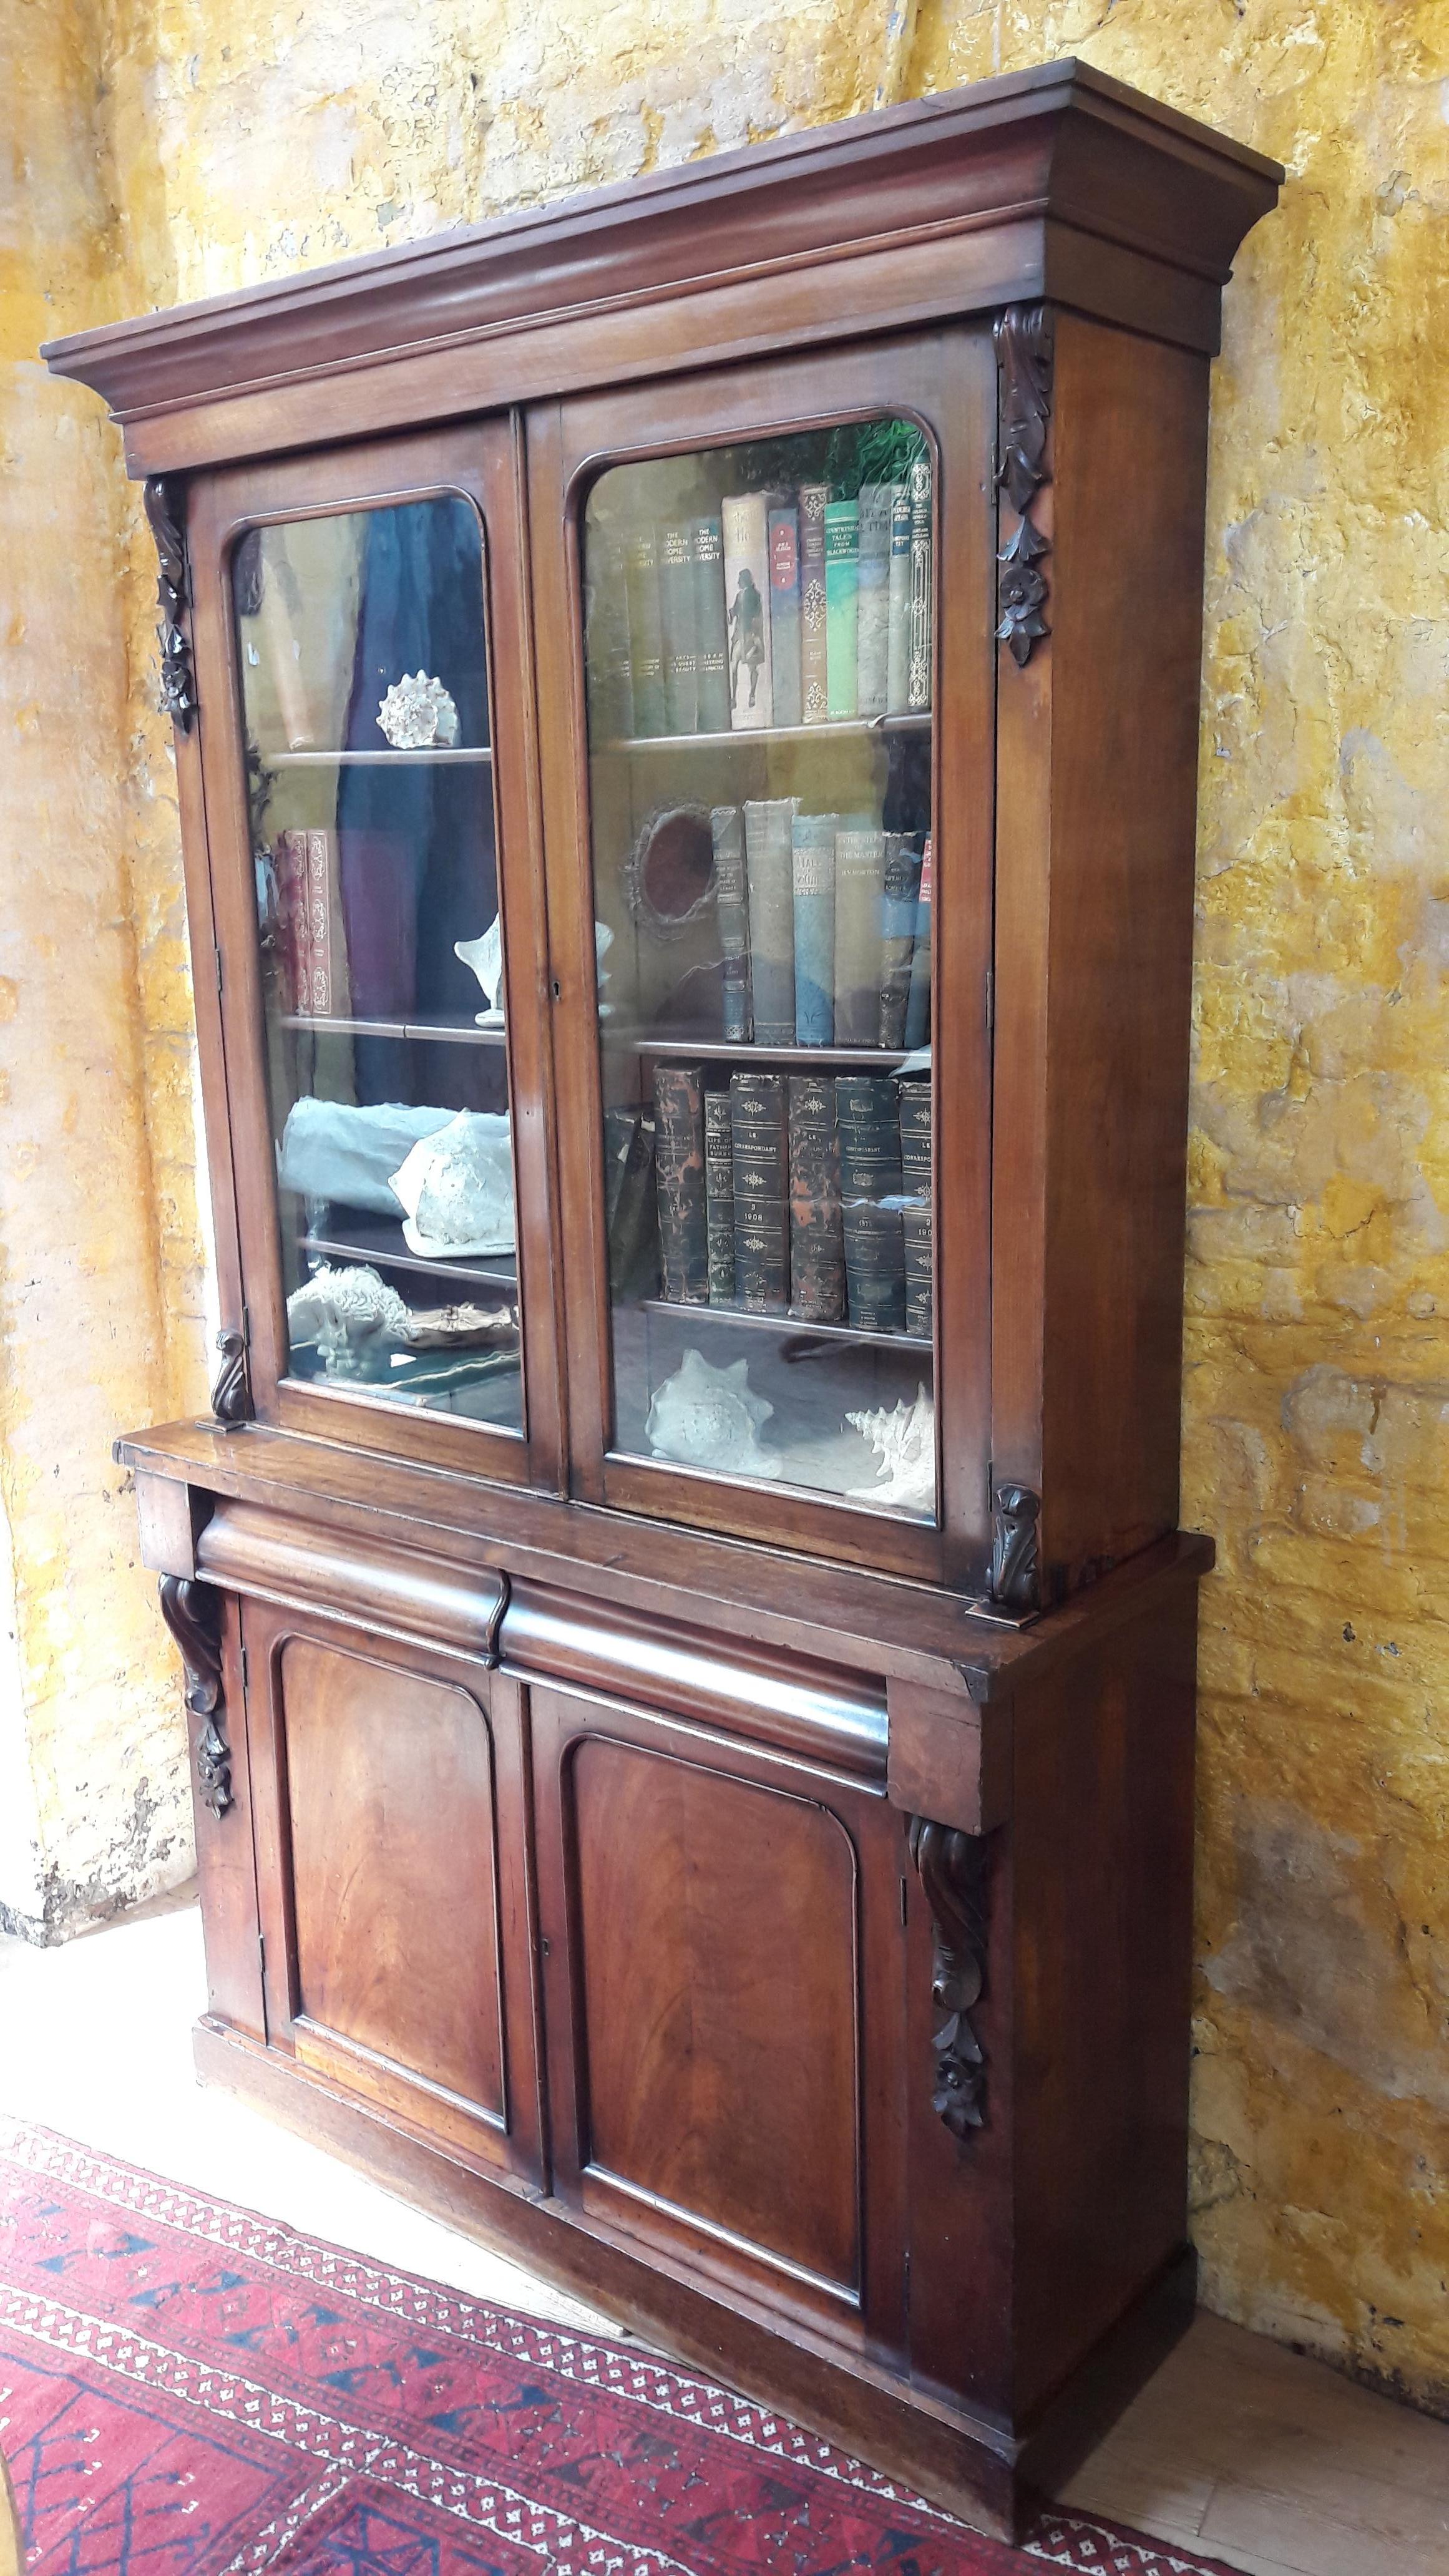 Elegant mid Victorian mahogany bookcase, circa 1850. Nice flower and leaves carvings in the corners. Can be used as a display cabinet.
The shelves are adjustable and this cabinet is in two pieces, easy to move.